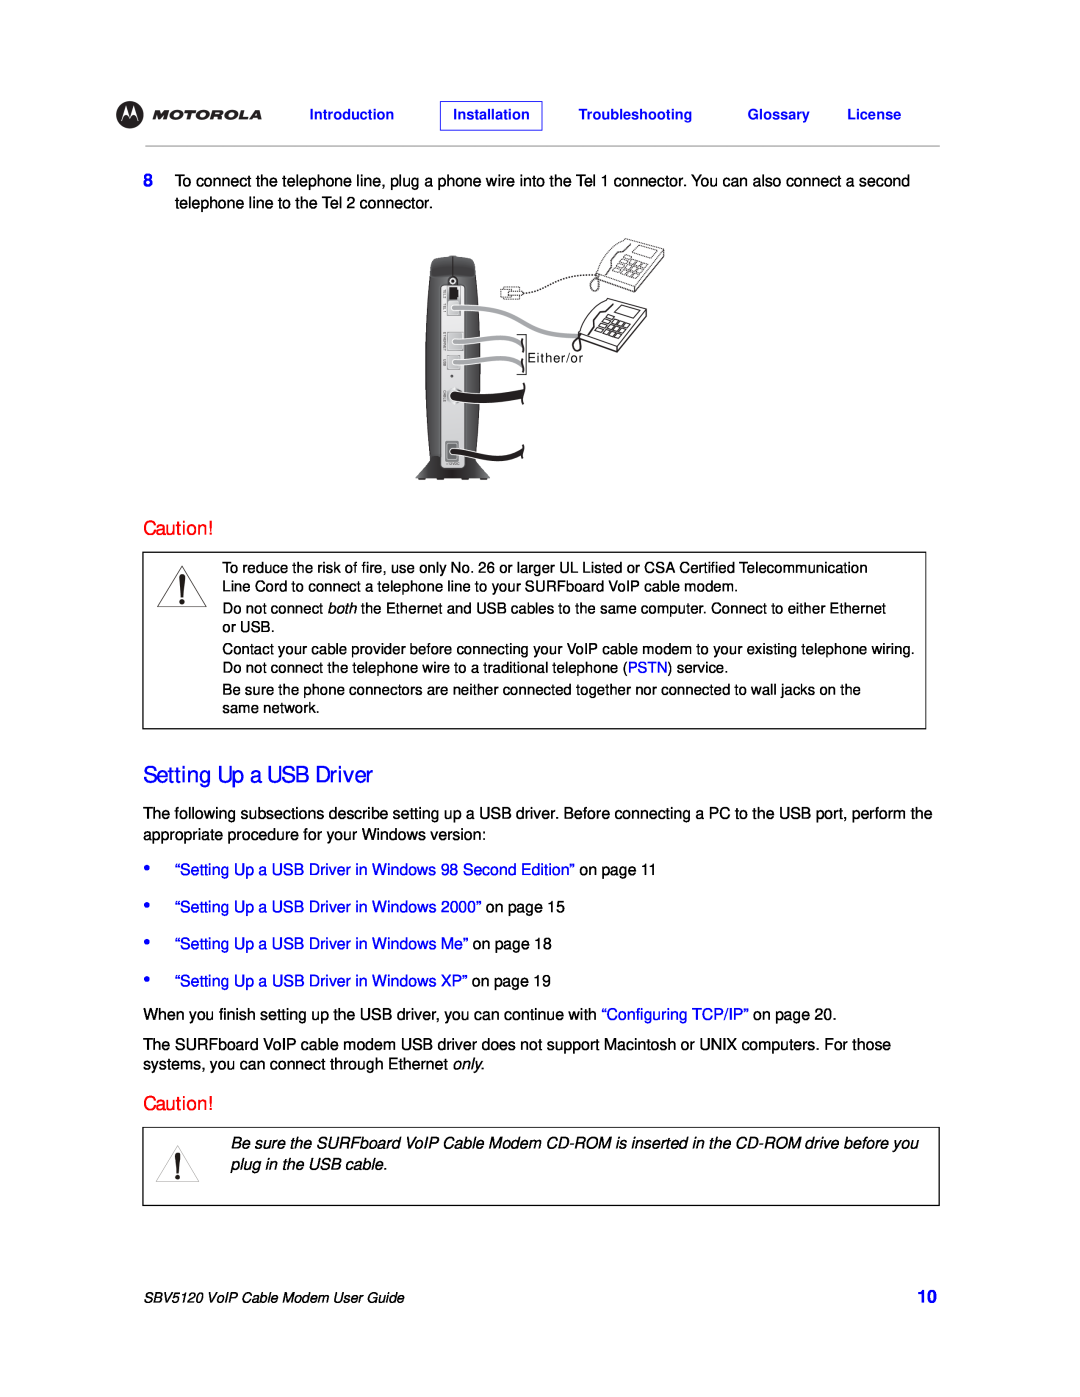 Motorola SBV5120 manual “Setting Up a USB Driver in Windows 98 Second Edition” on page 